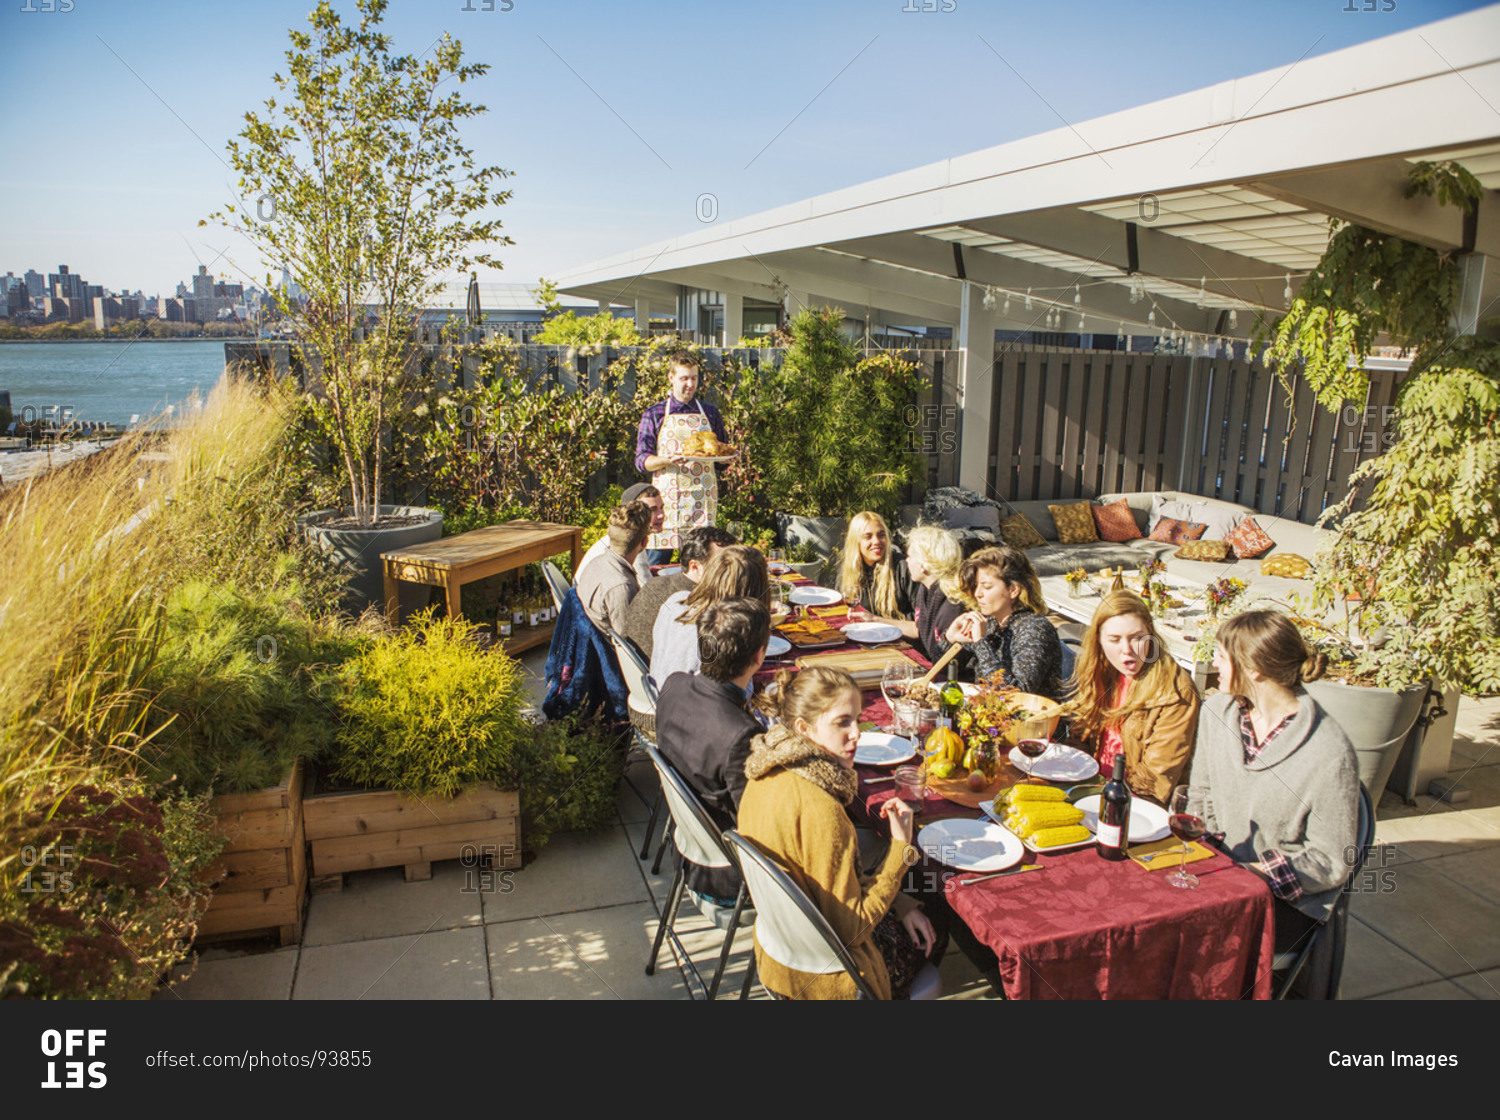 Thanksgiving on a rooftop terrace with friends